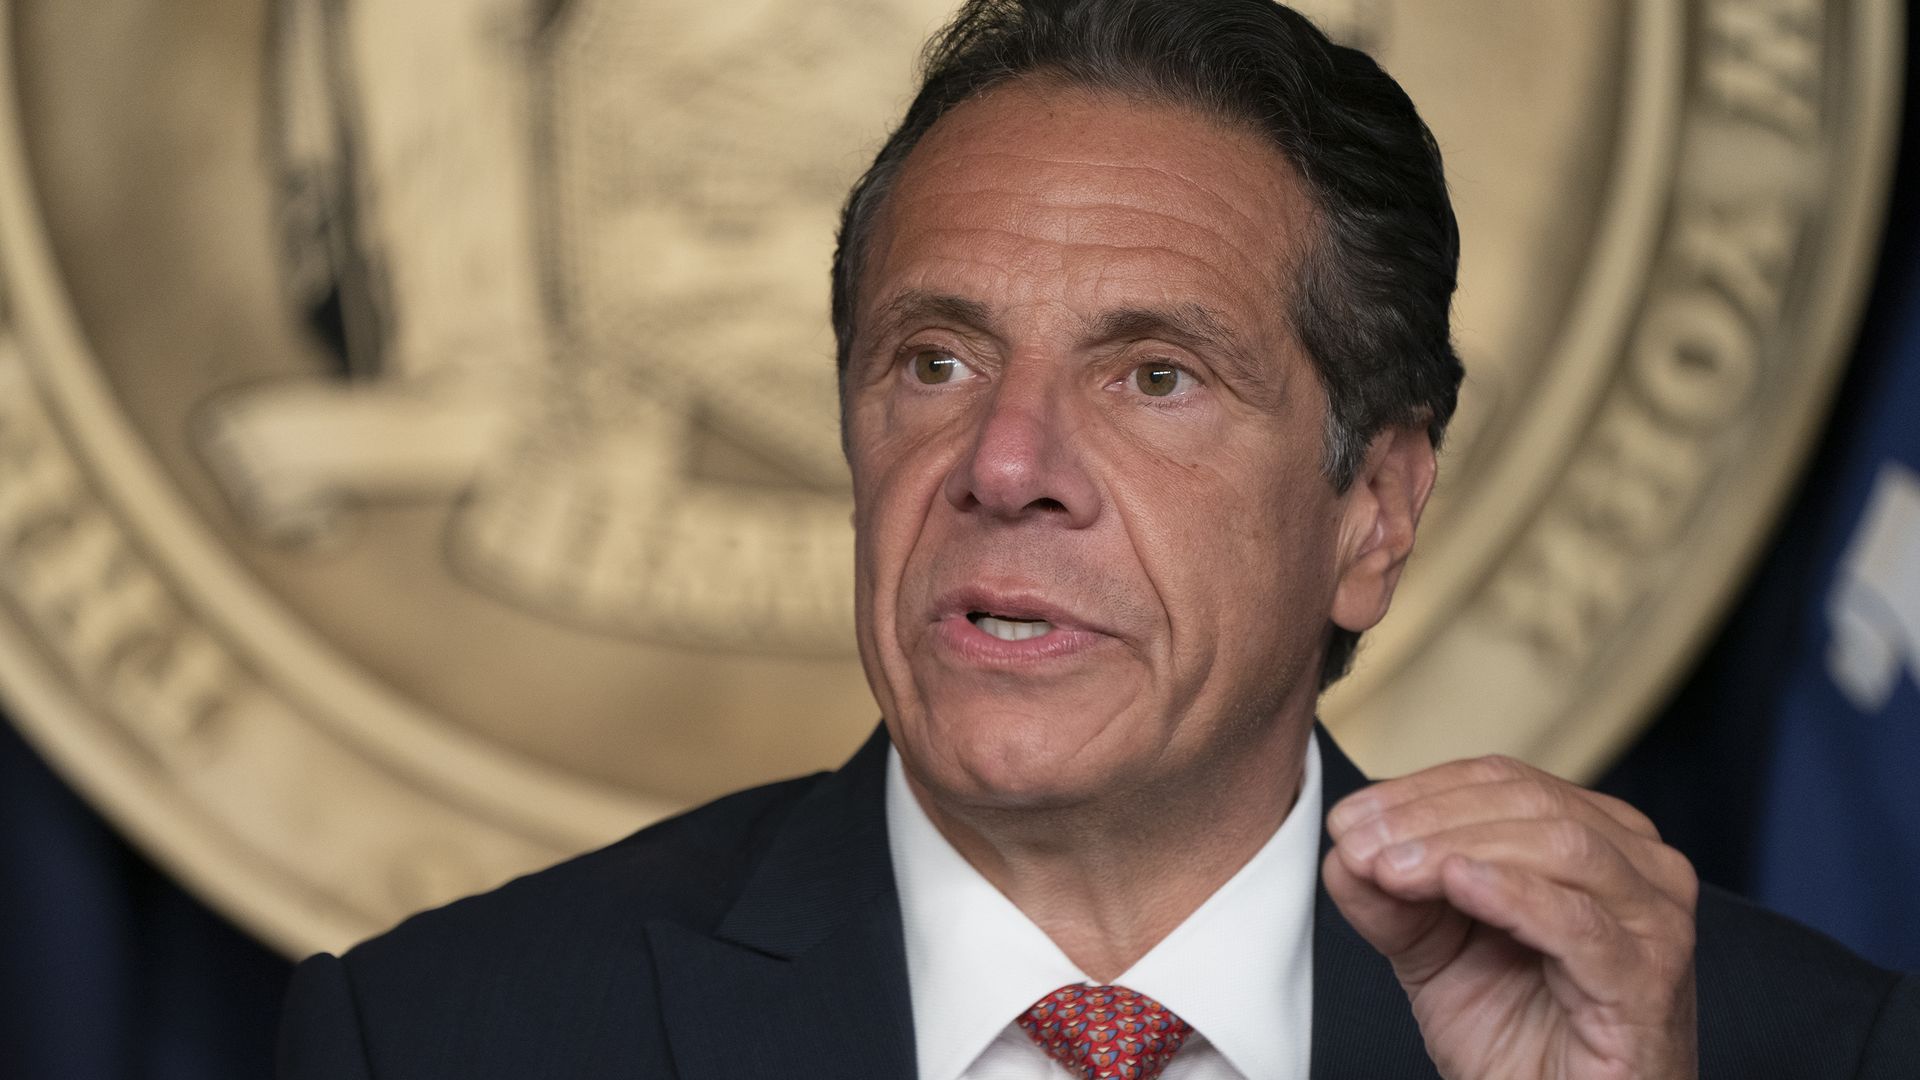 Andrew Cuomo holds a press briefing.